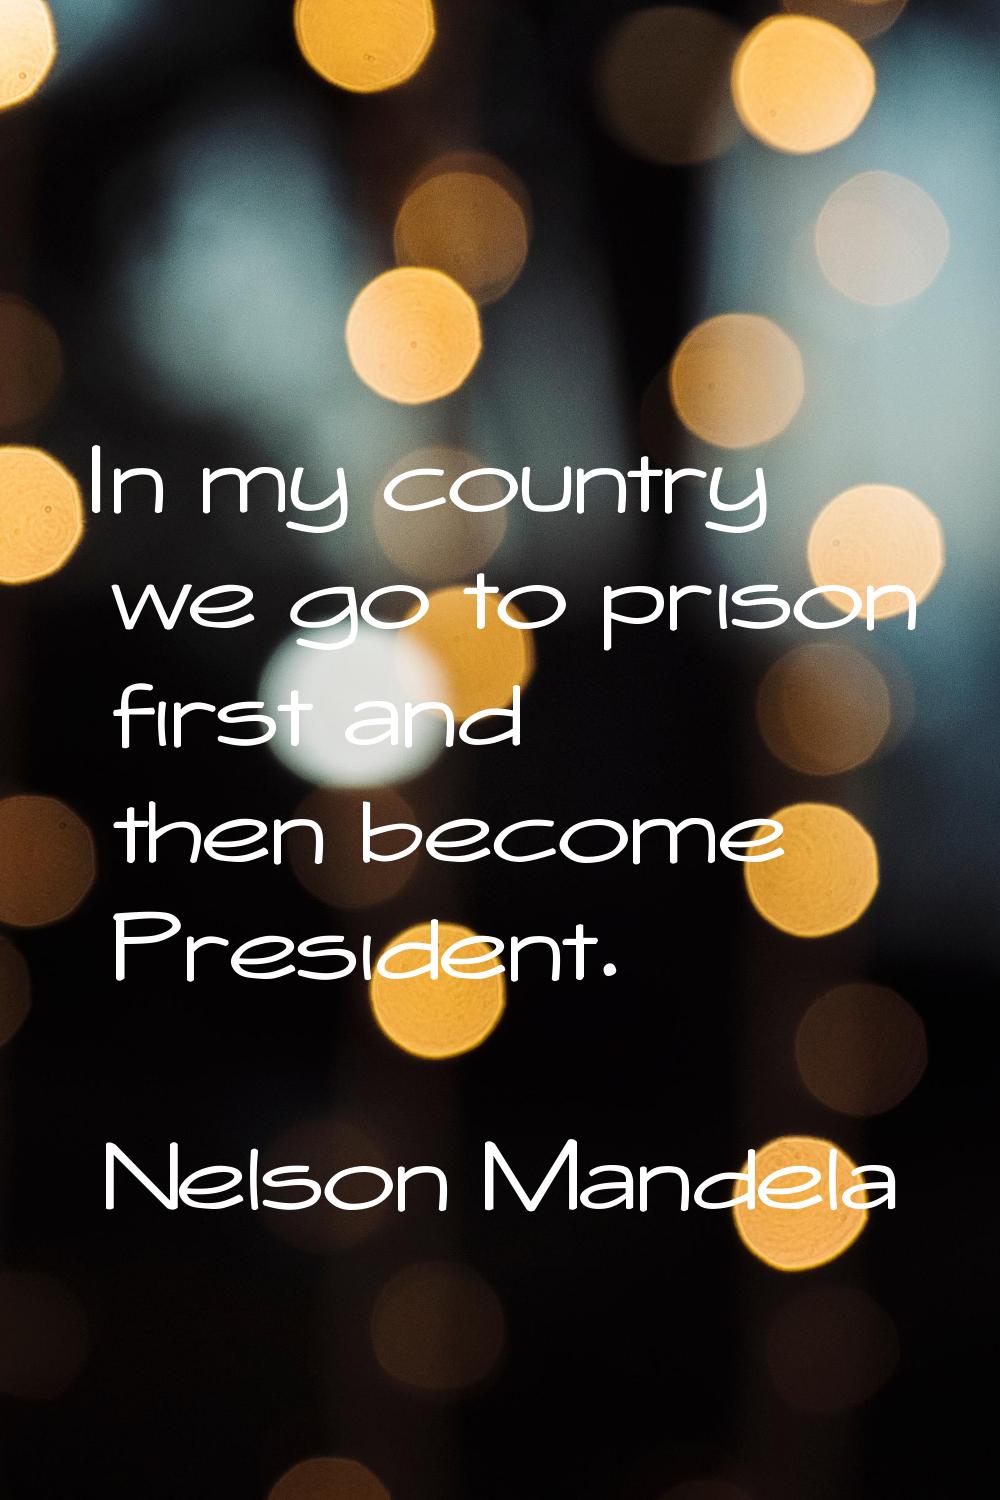 In my country we go to prison first and then become President.